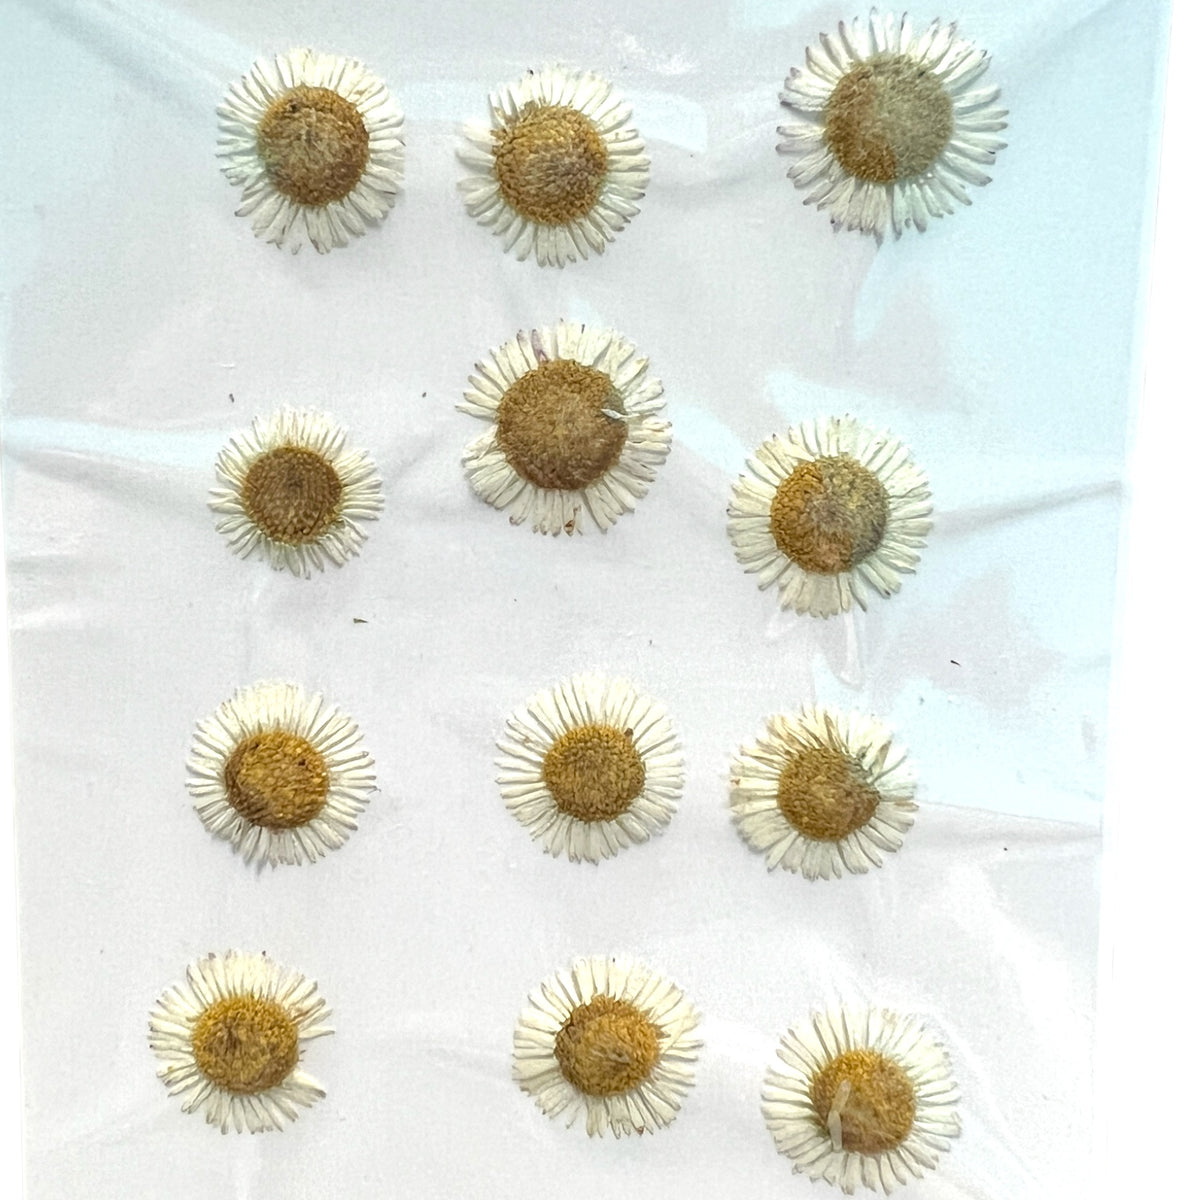 120 Pieces Real Dried Daisy Flowers Natural Dried Daisies DIY Dry Daisy  Petals Pressed Chrysanthemum Flowers for Album Scrapbooks Resin Soap Art